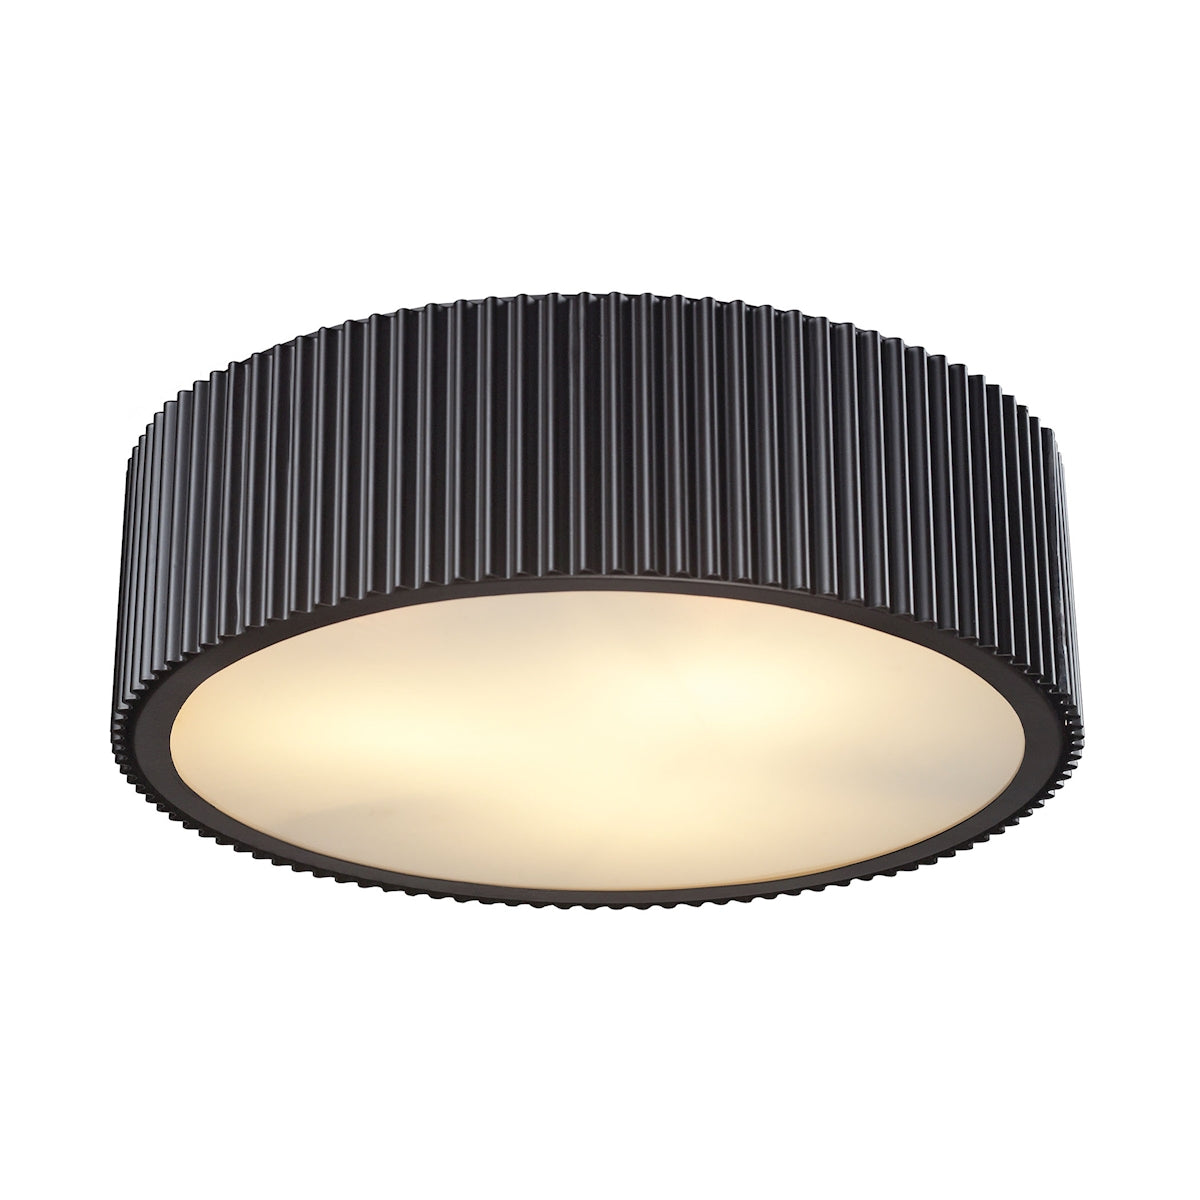 Brendon 3-Light Flush Mount in Oil Rubbed Bronze with Diffuser